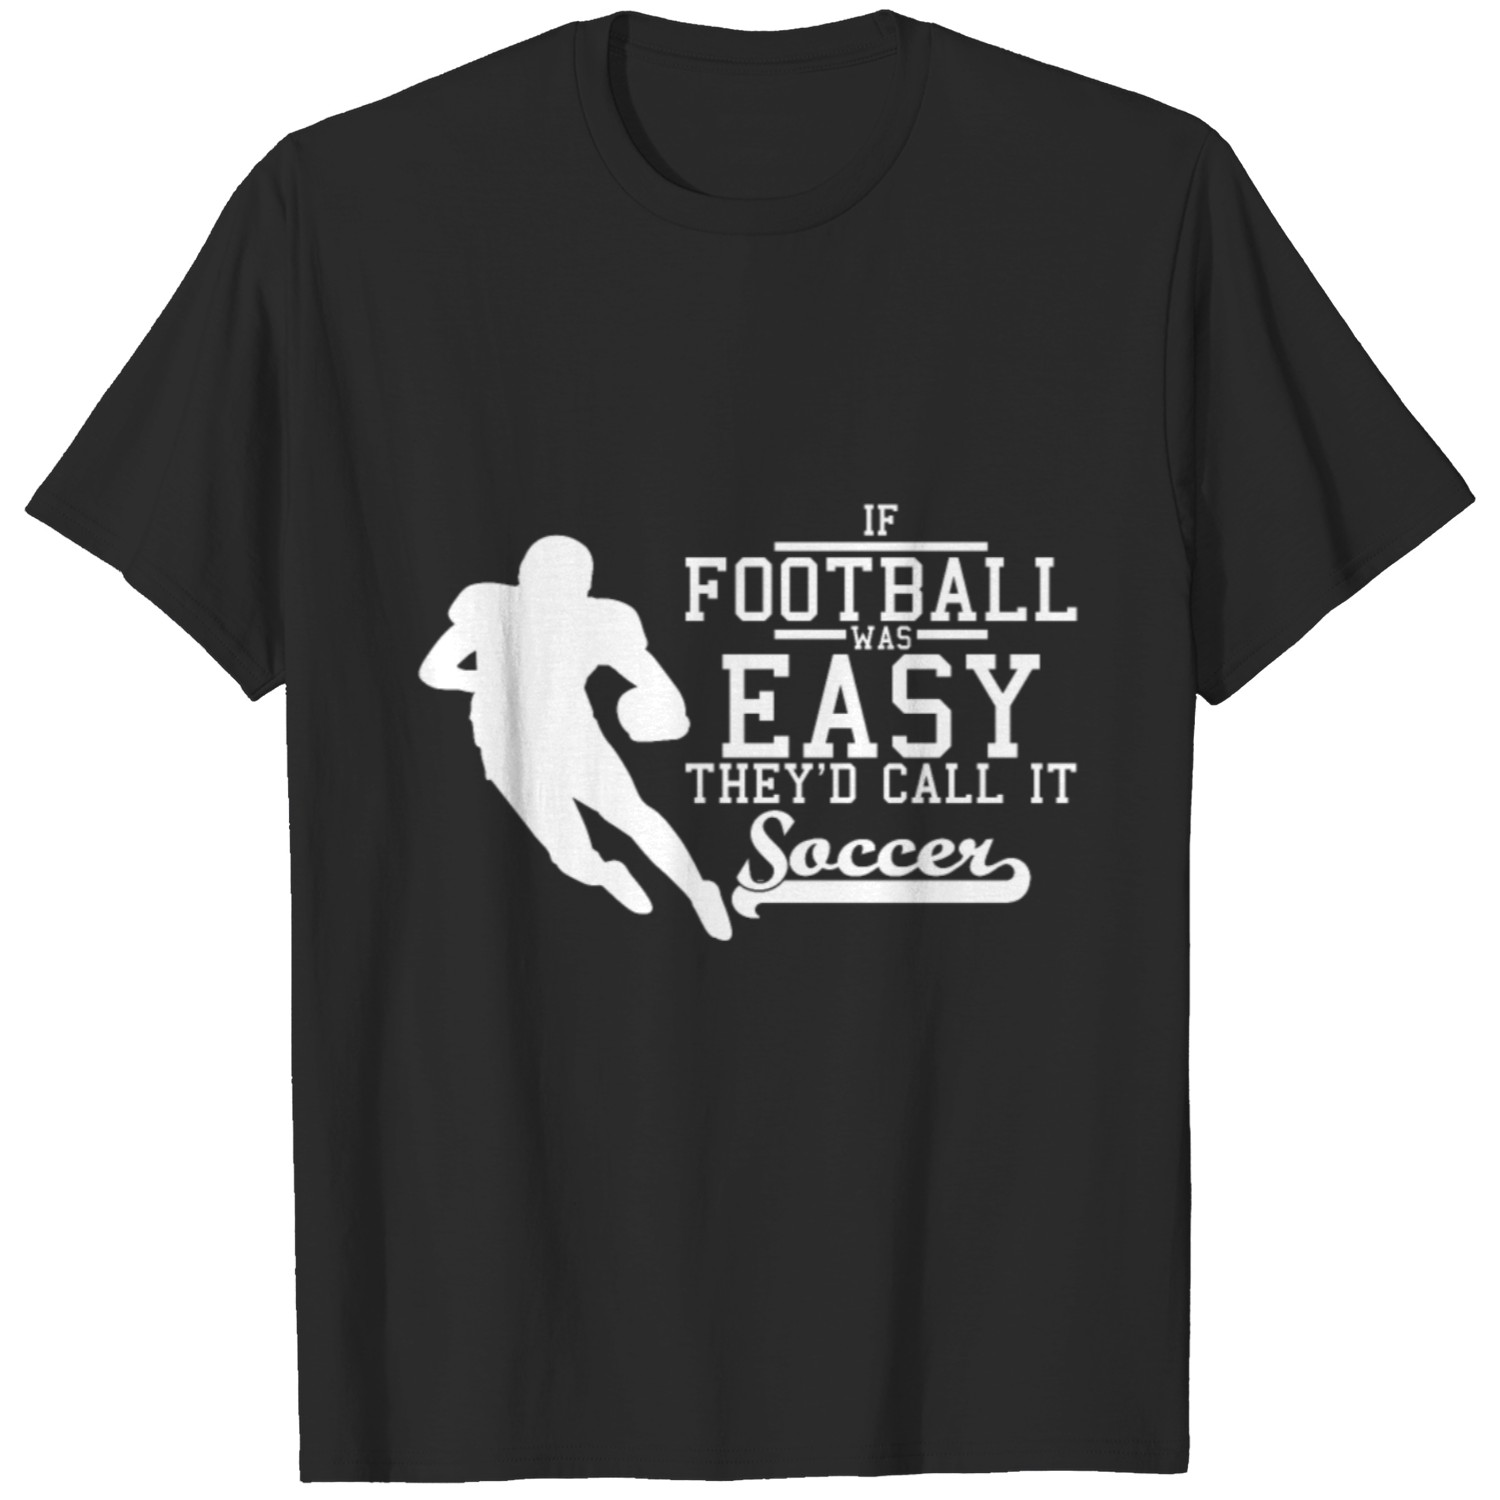 If Football was easy they'd call it Soccer T-shirt